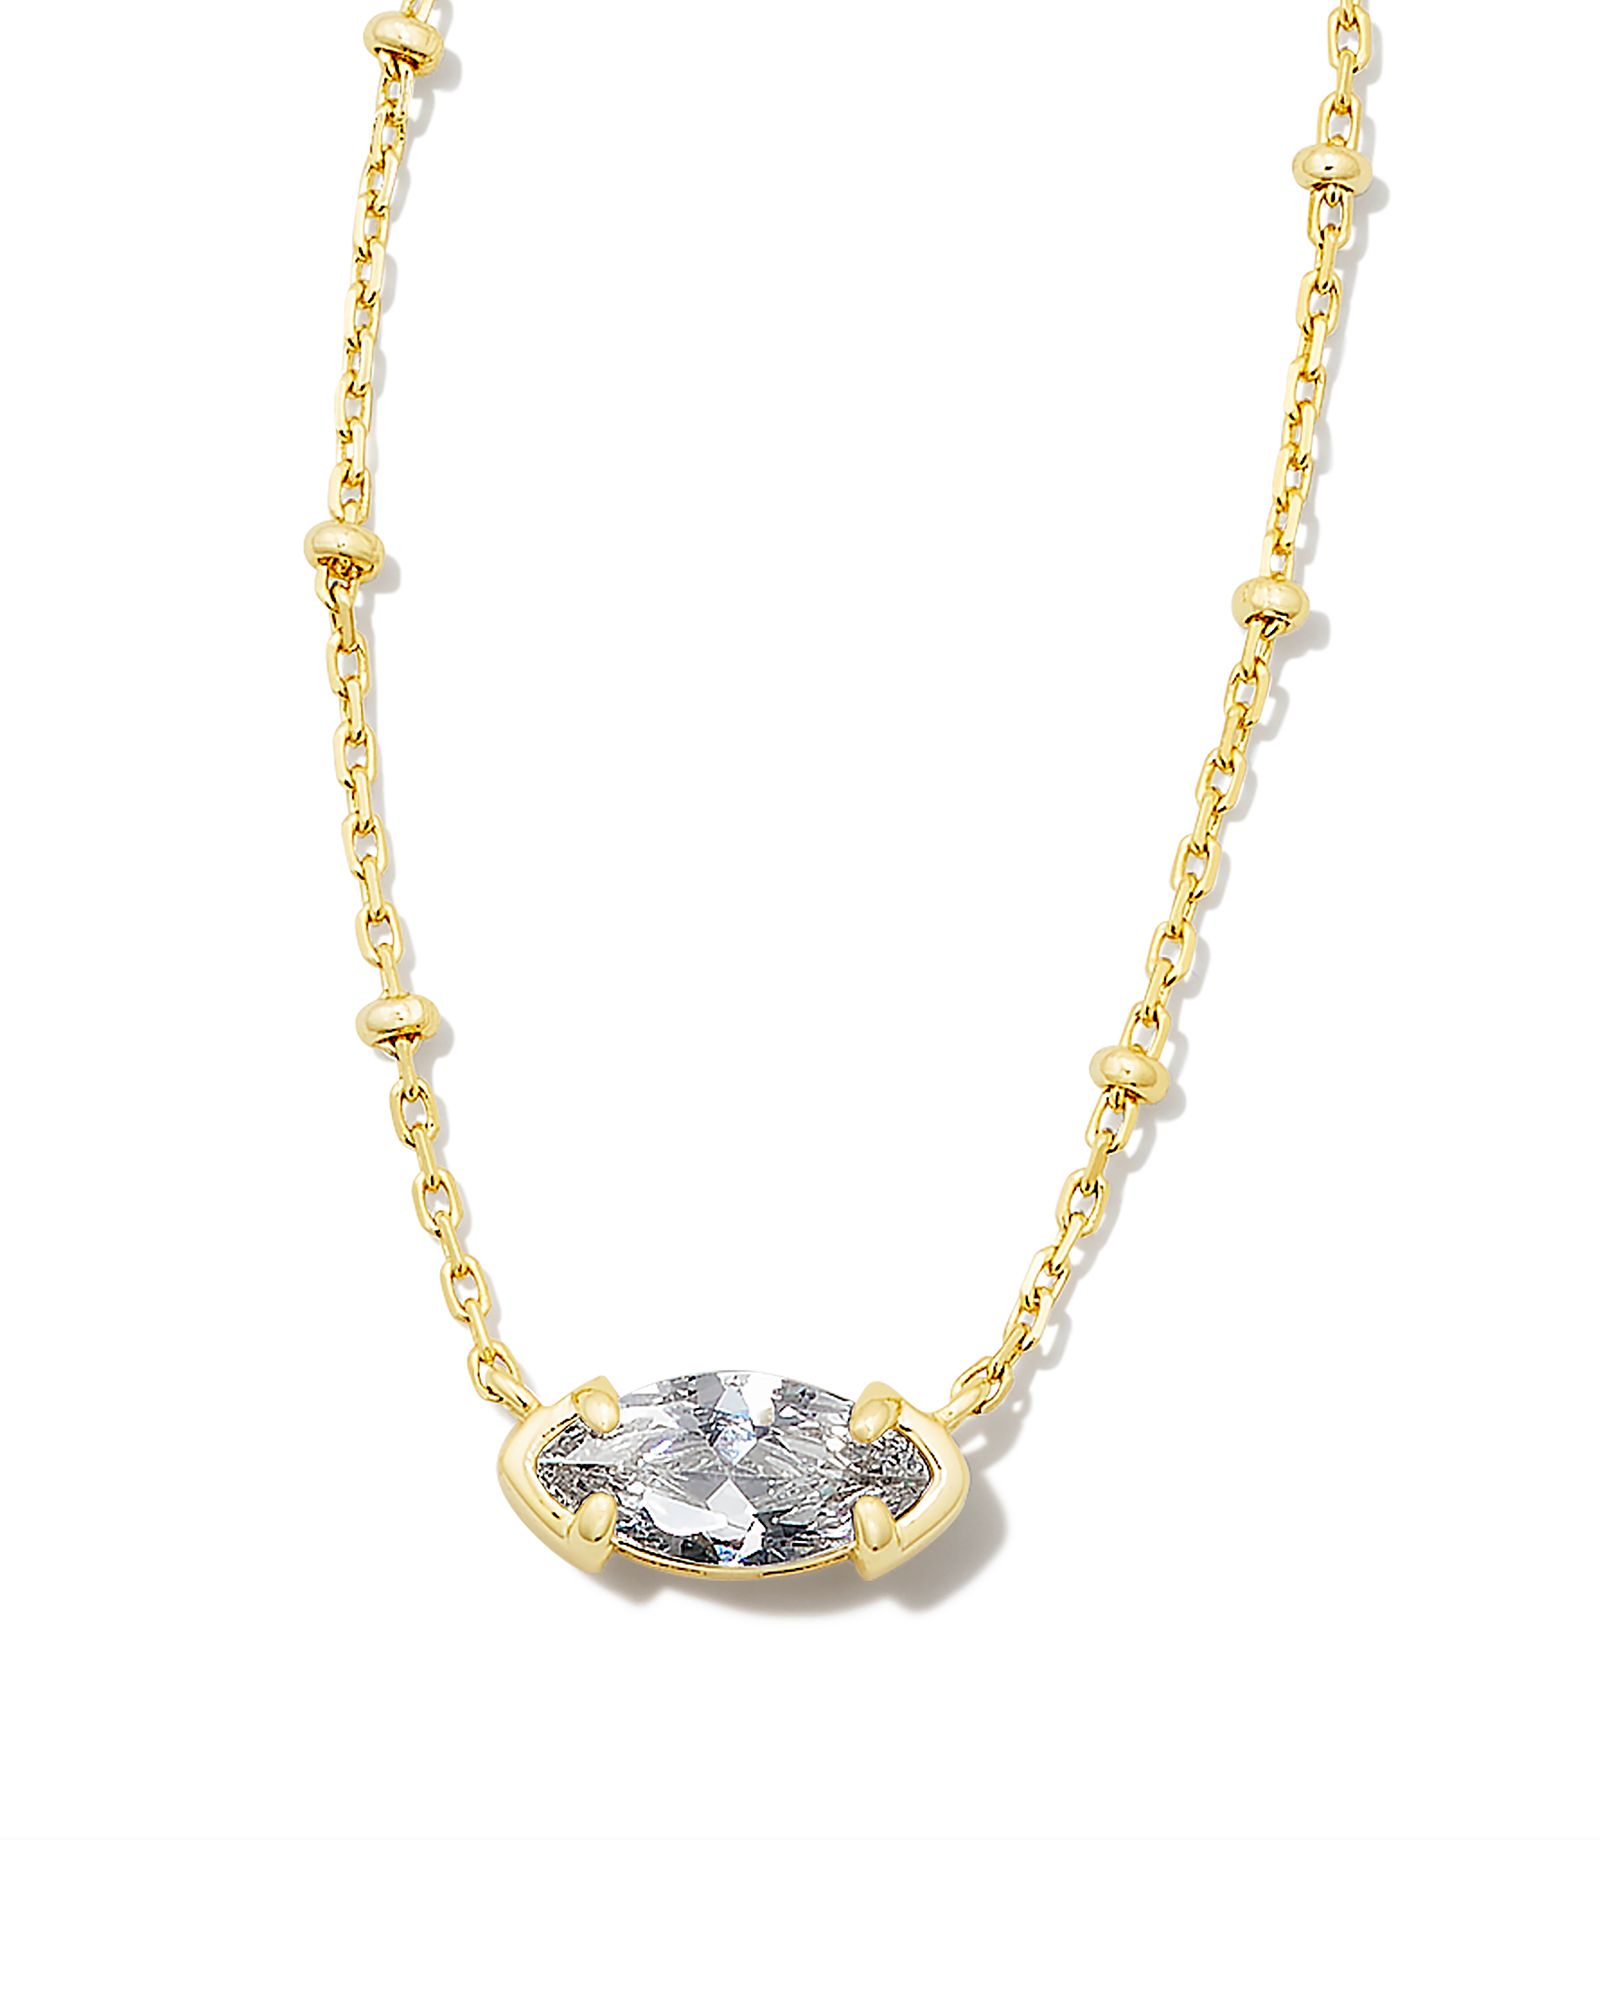 Bailey Chain Necklace - j.hoffman's